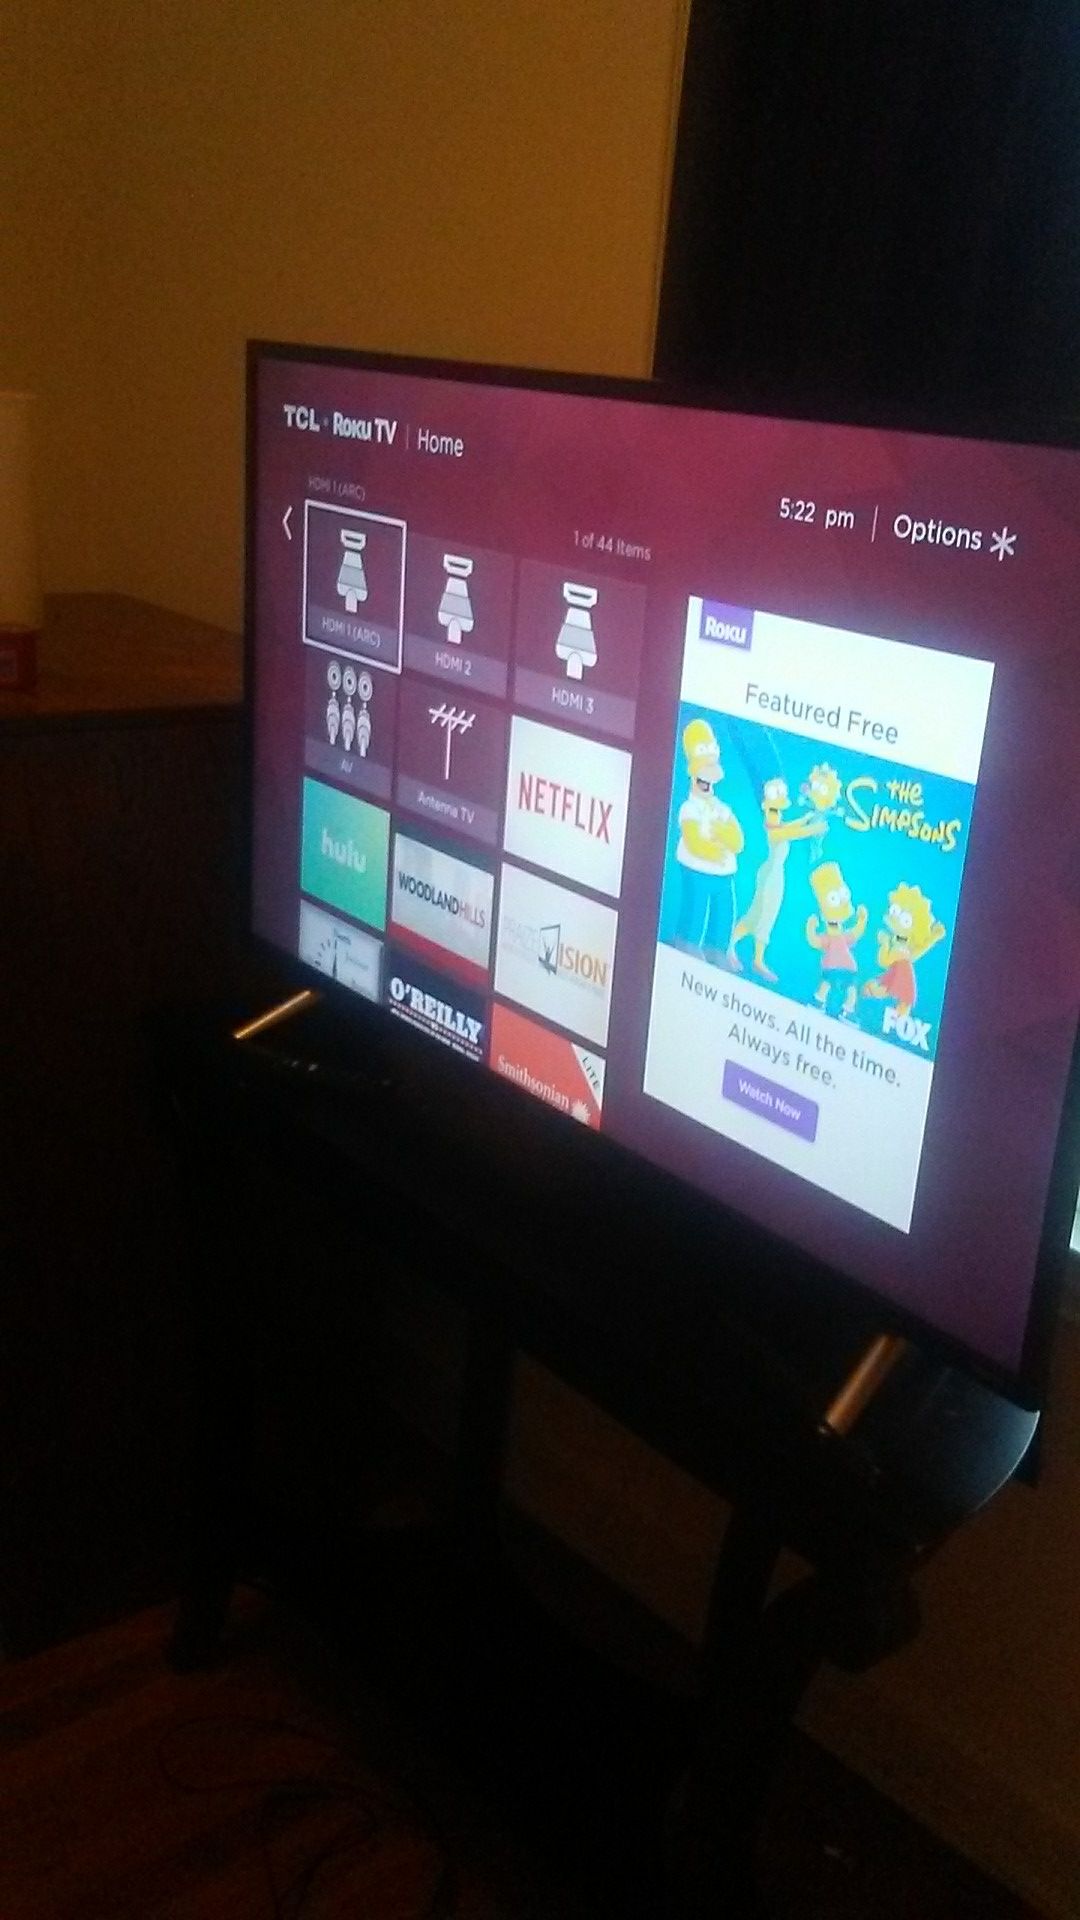 TCL 49" Roku/Smart TV with stand and remote